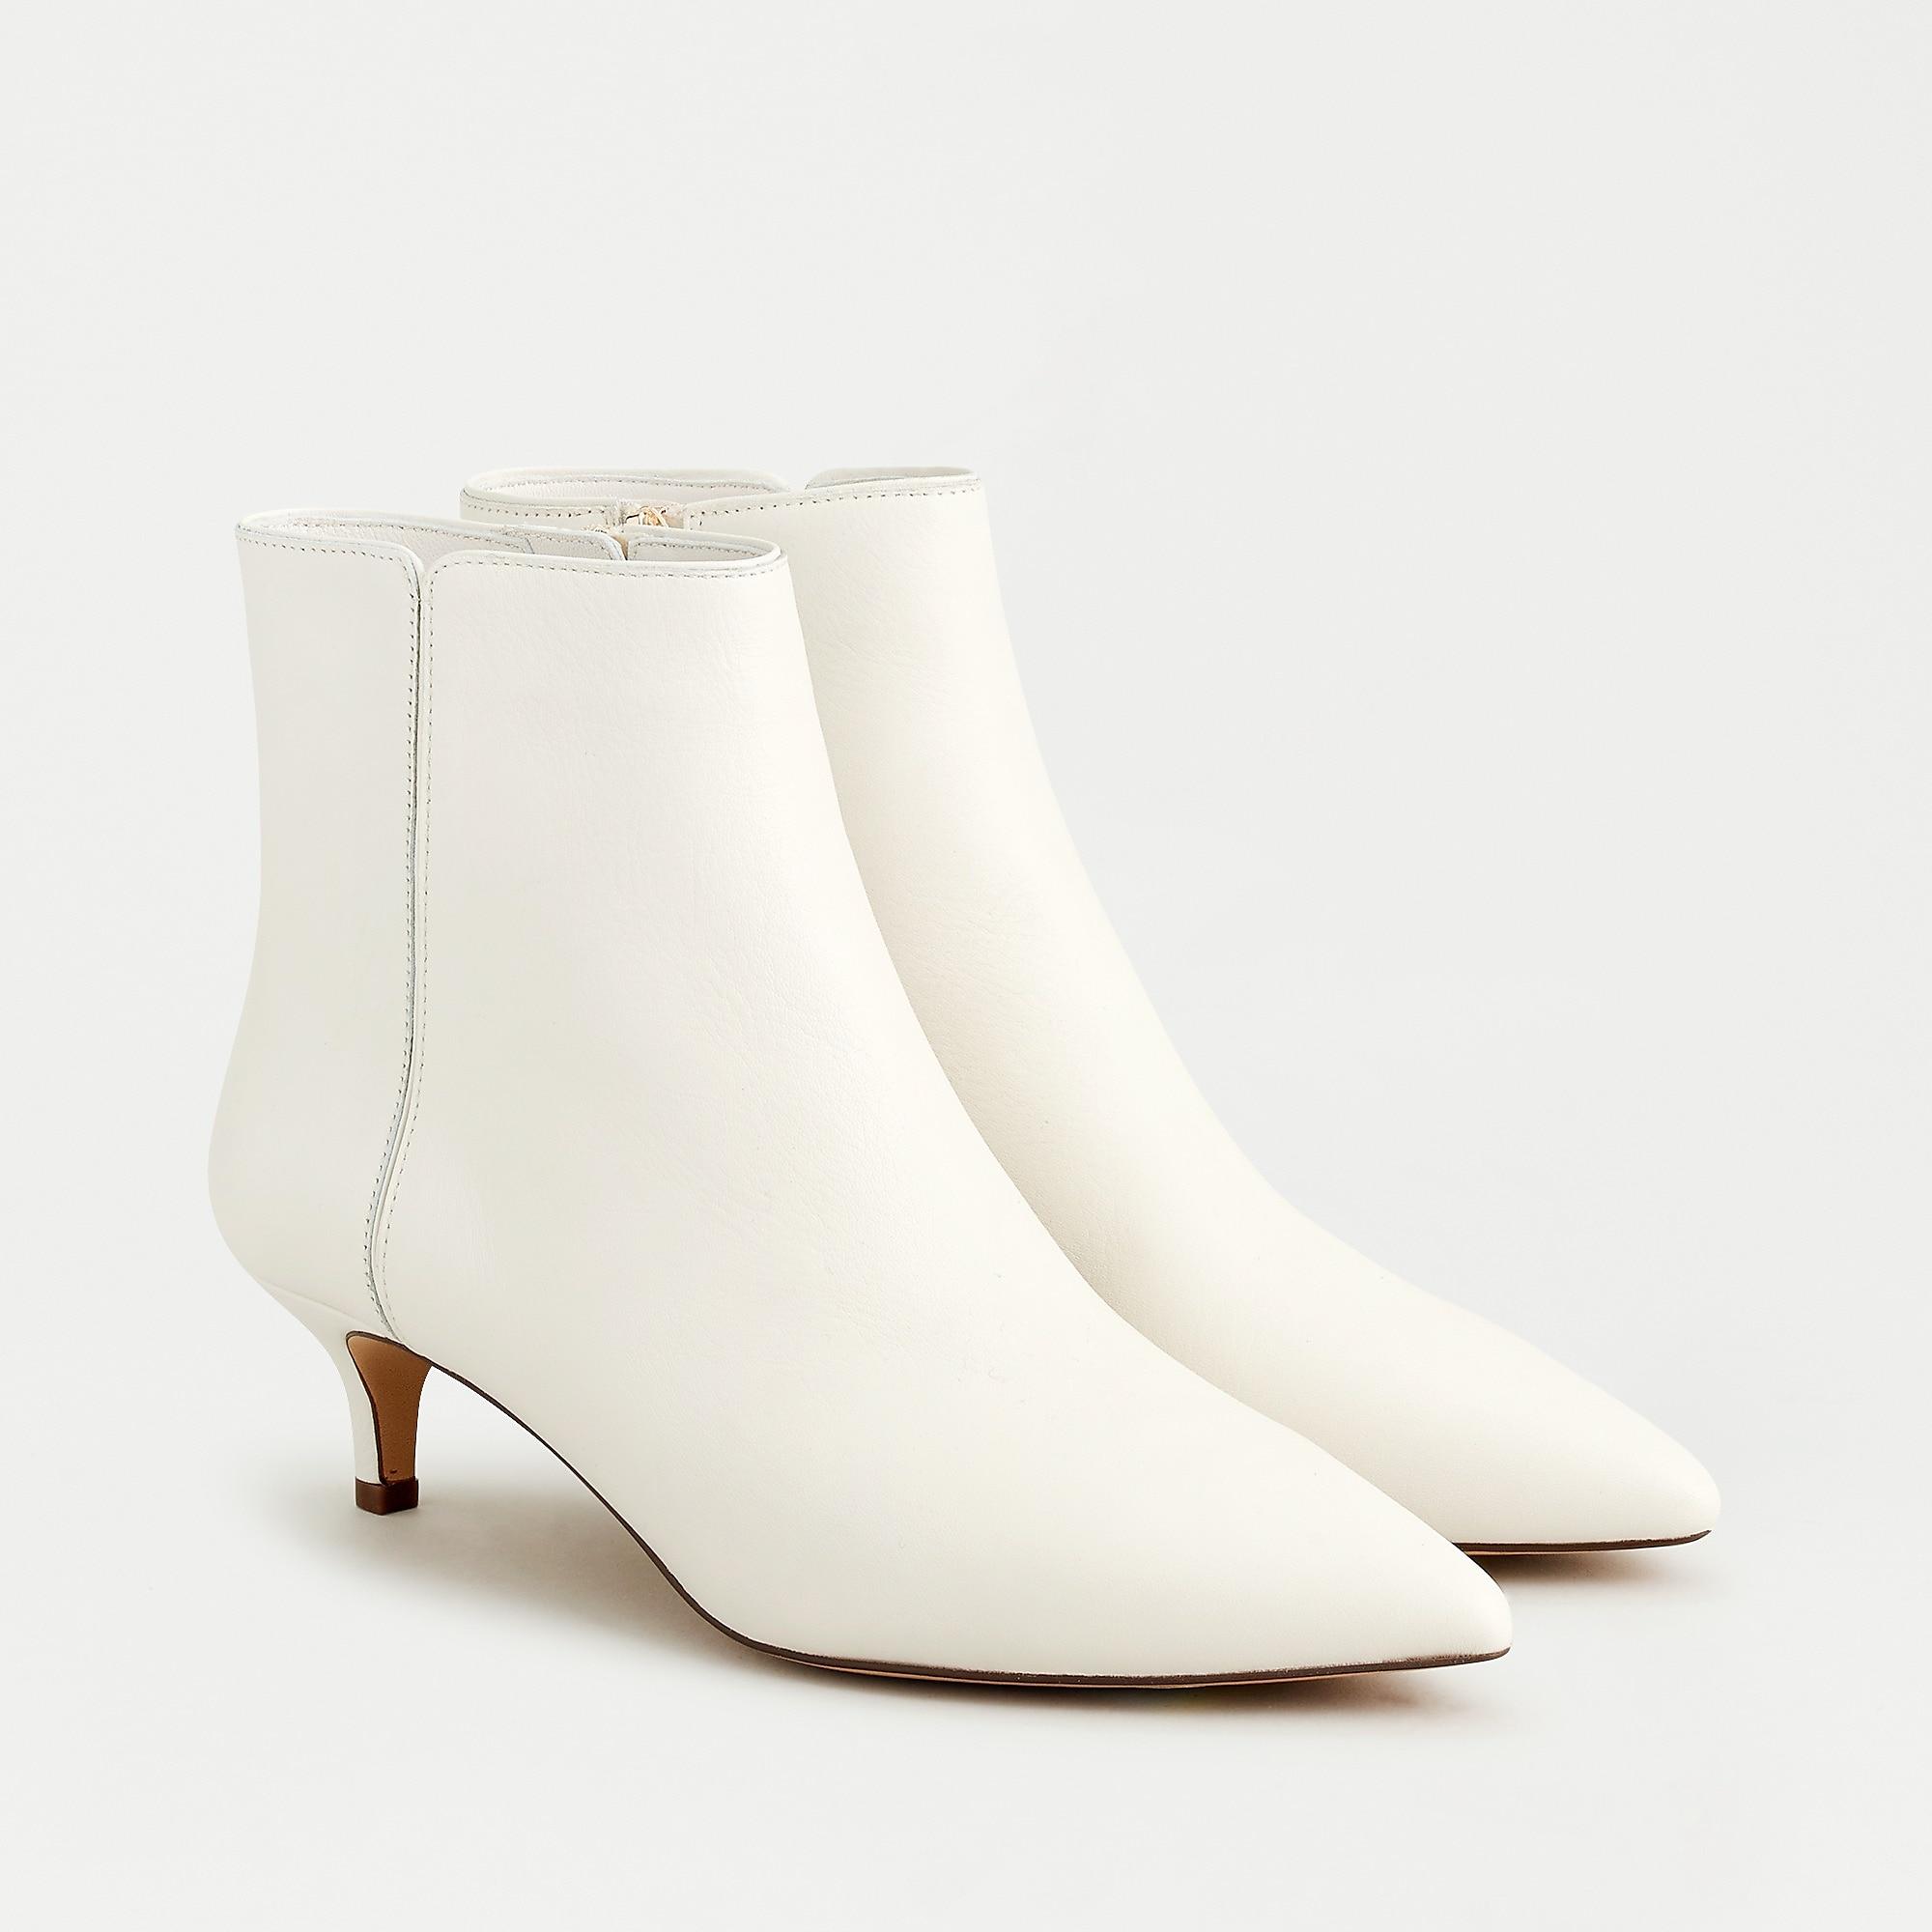 J.Crew Fiona Kitten-heel Ankle Boots In Ivory Leather in White | Lyst